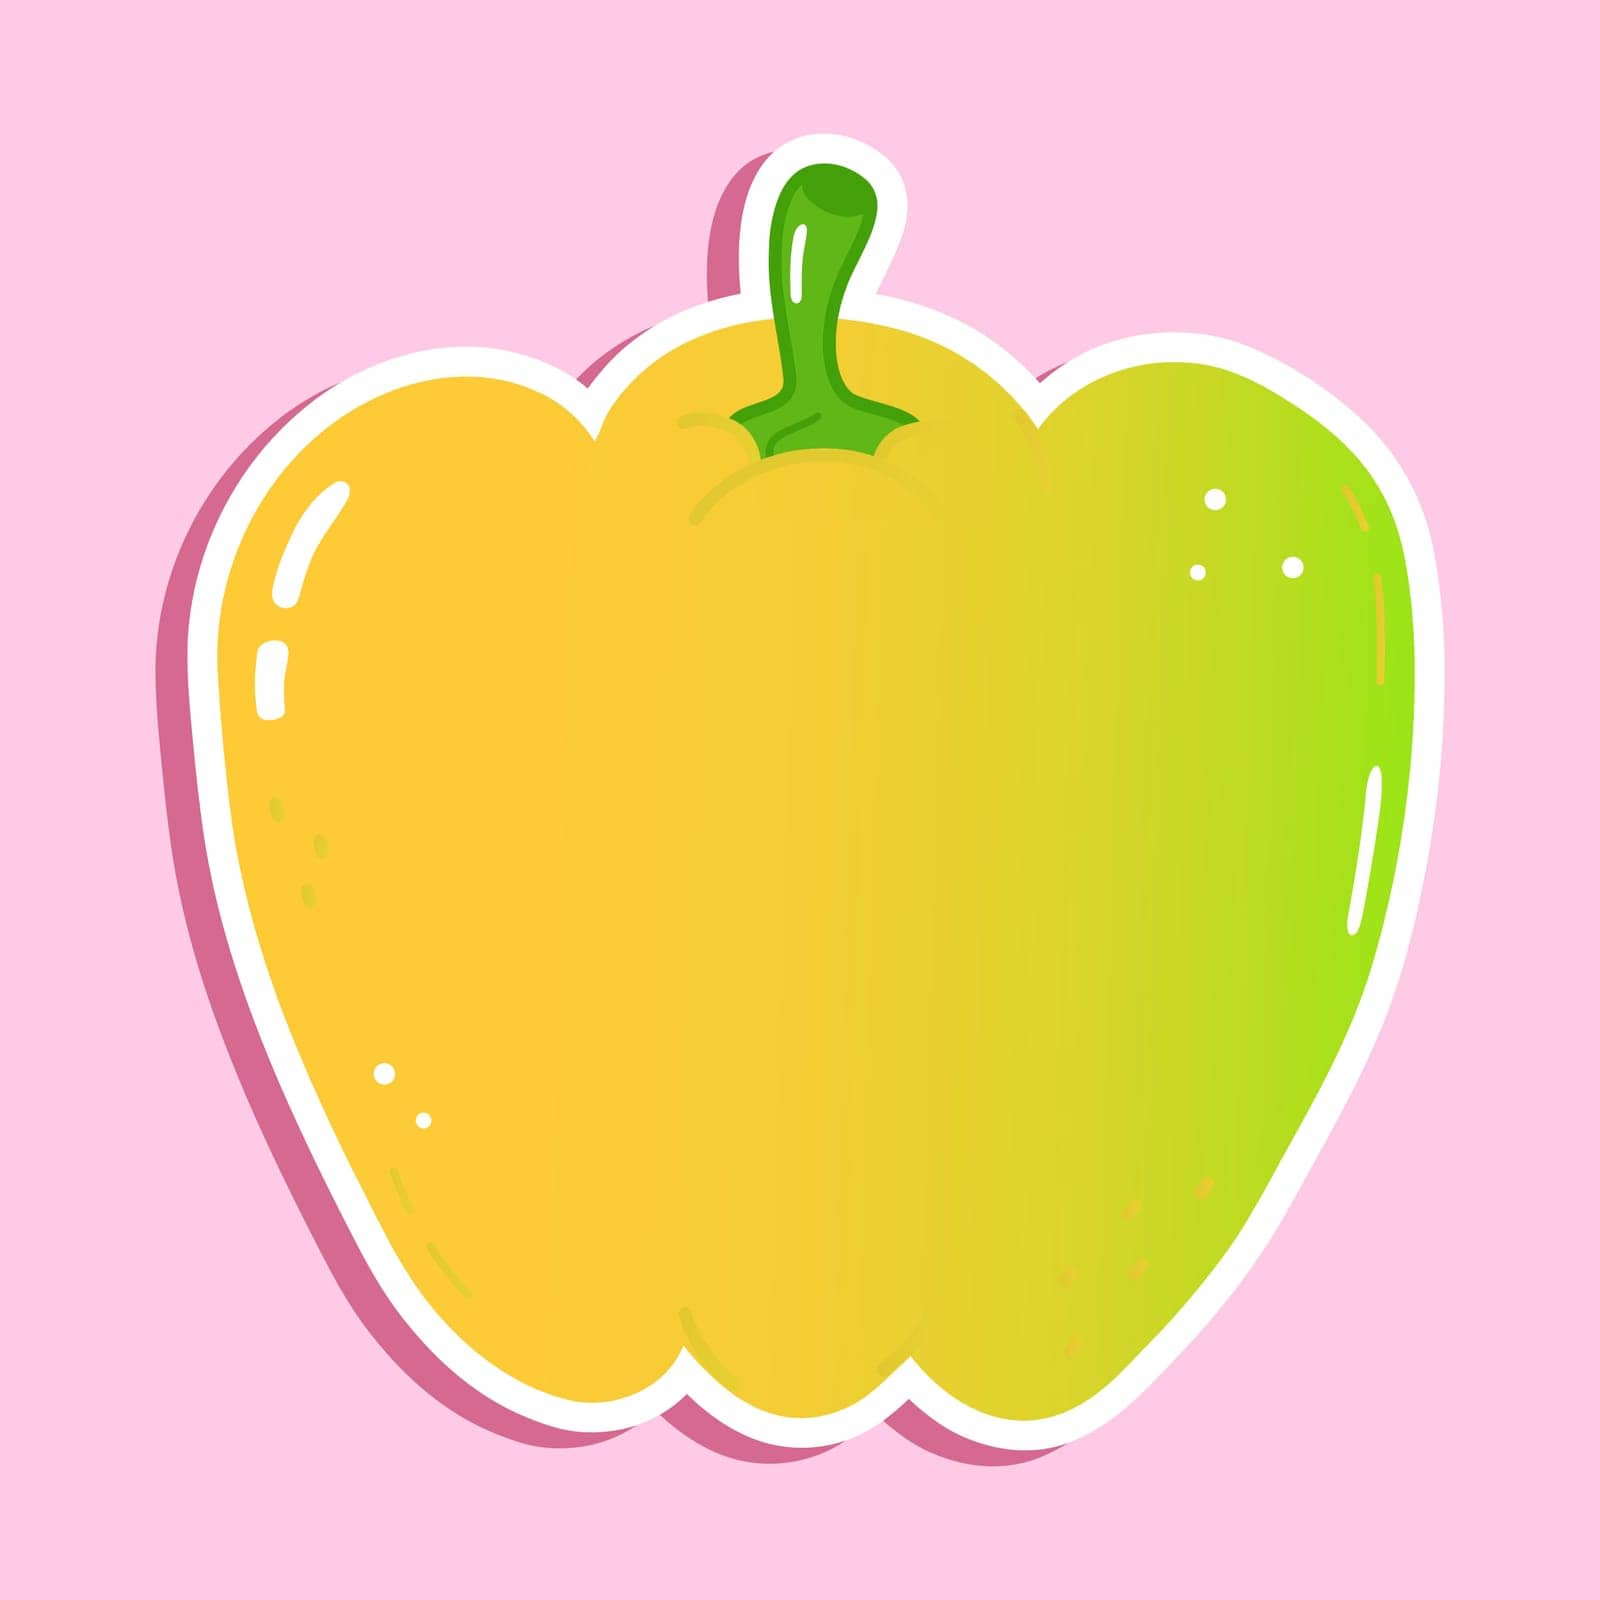 Cute funny colored bell pepper sticker character. Vector hand drawn cartoon kawaii character illustration icon. Isolated on pink background. Happy colored bell pepper character concept